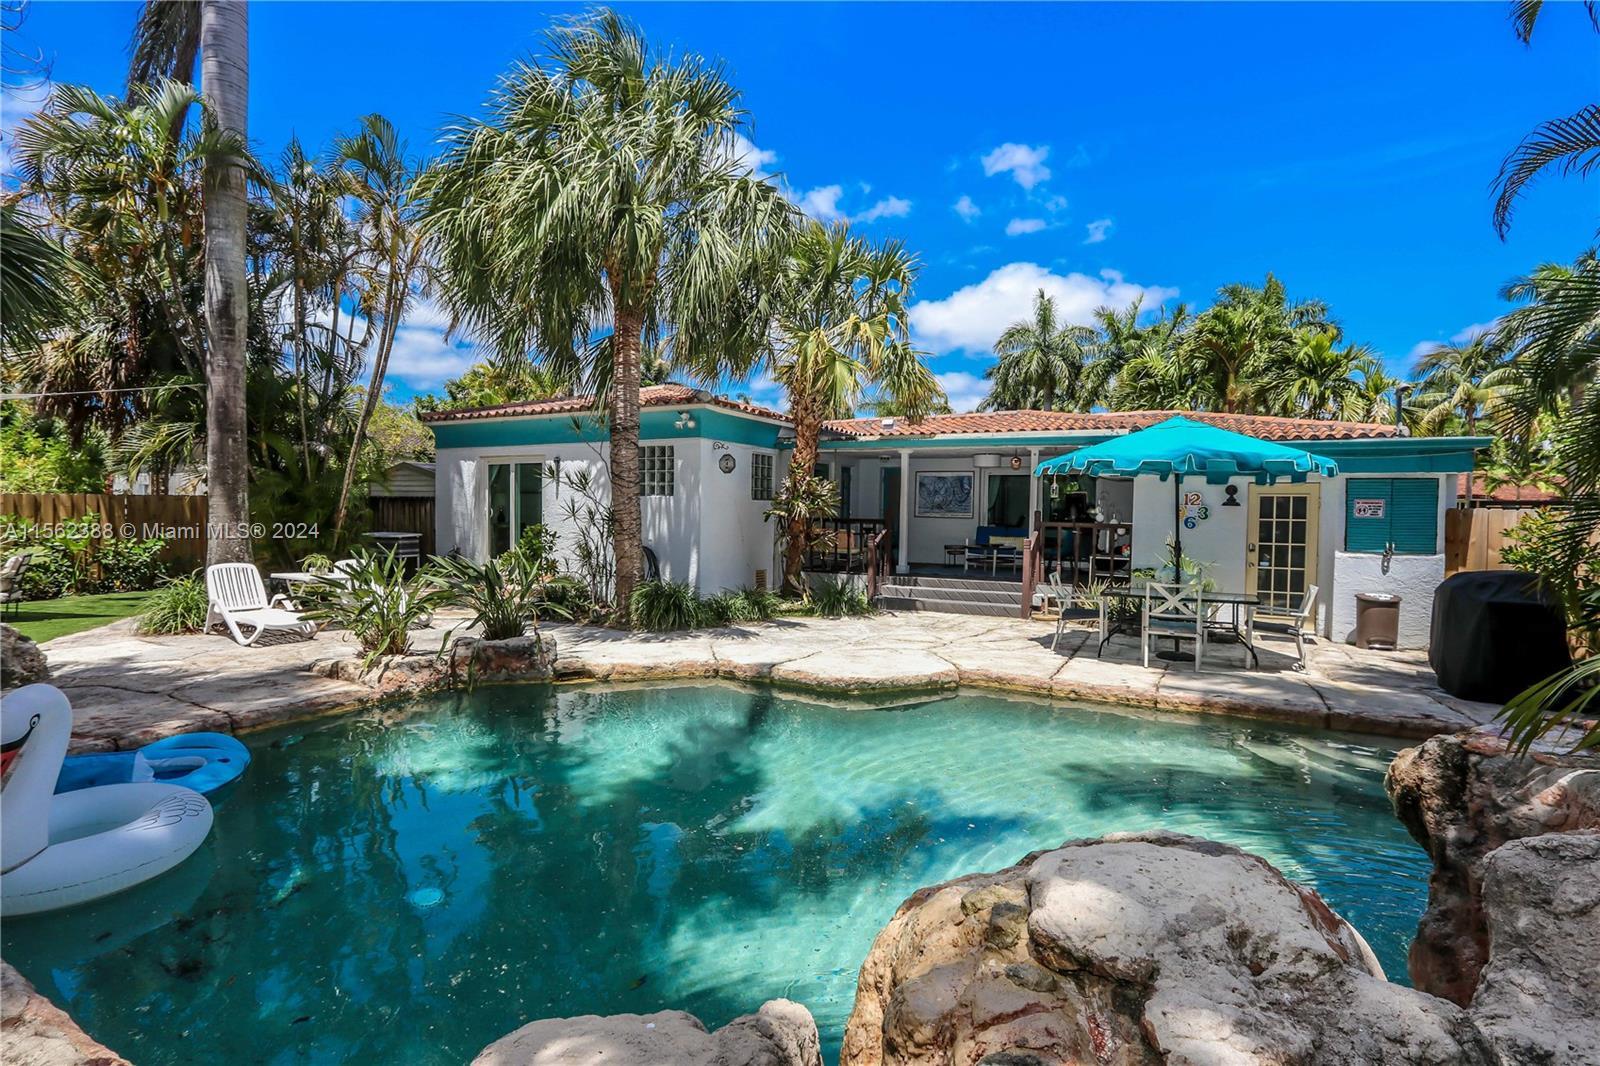 Your private tropical paradise awaits in this stunning home with a lush backyard straight from a mag